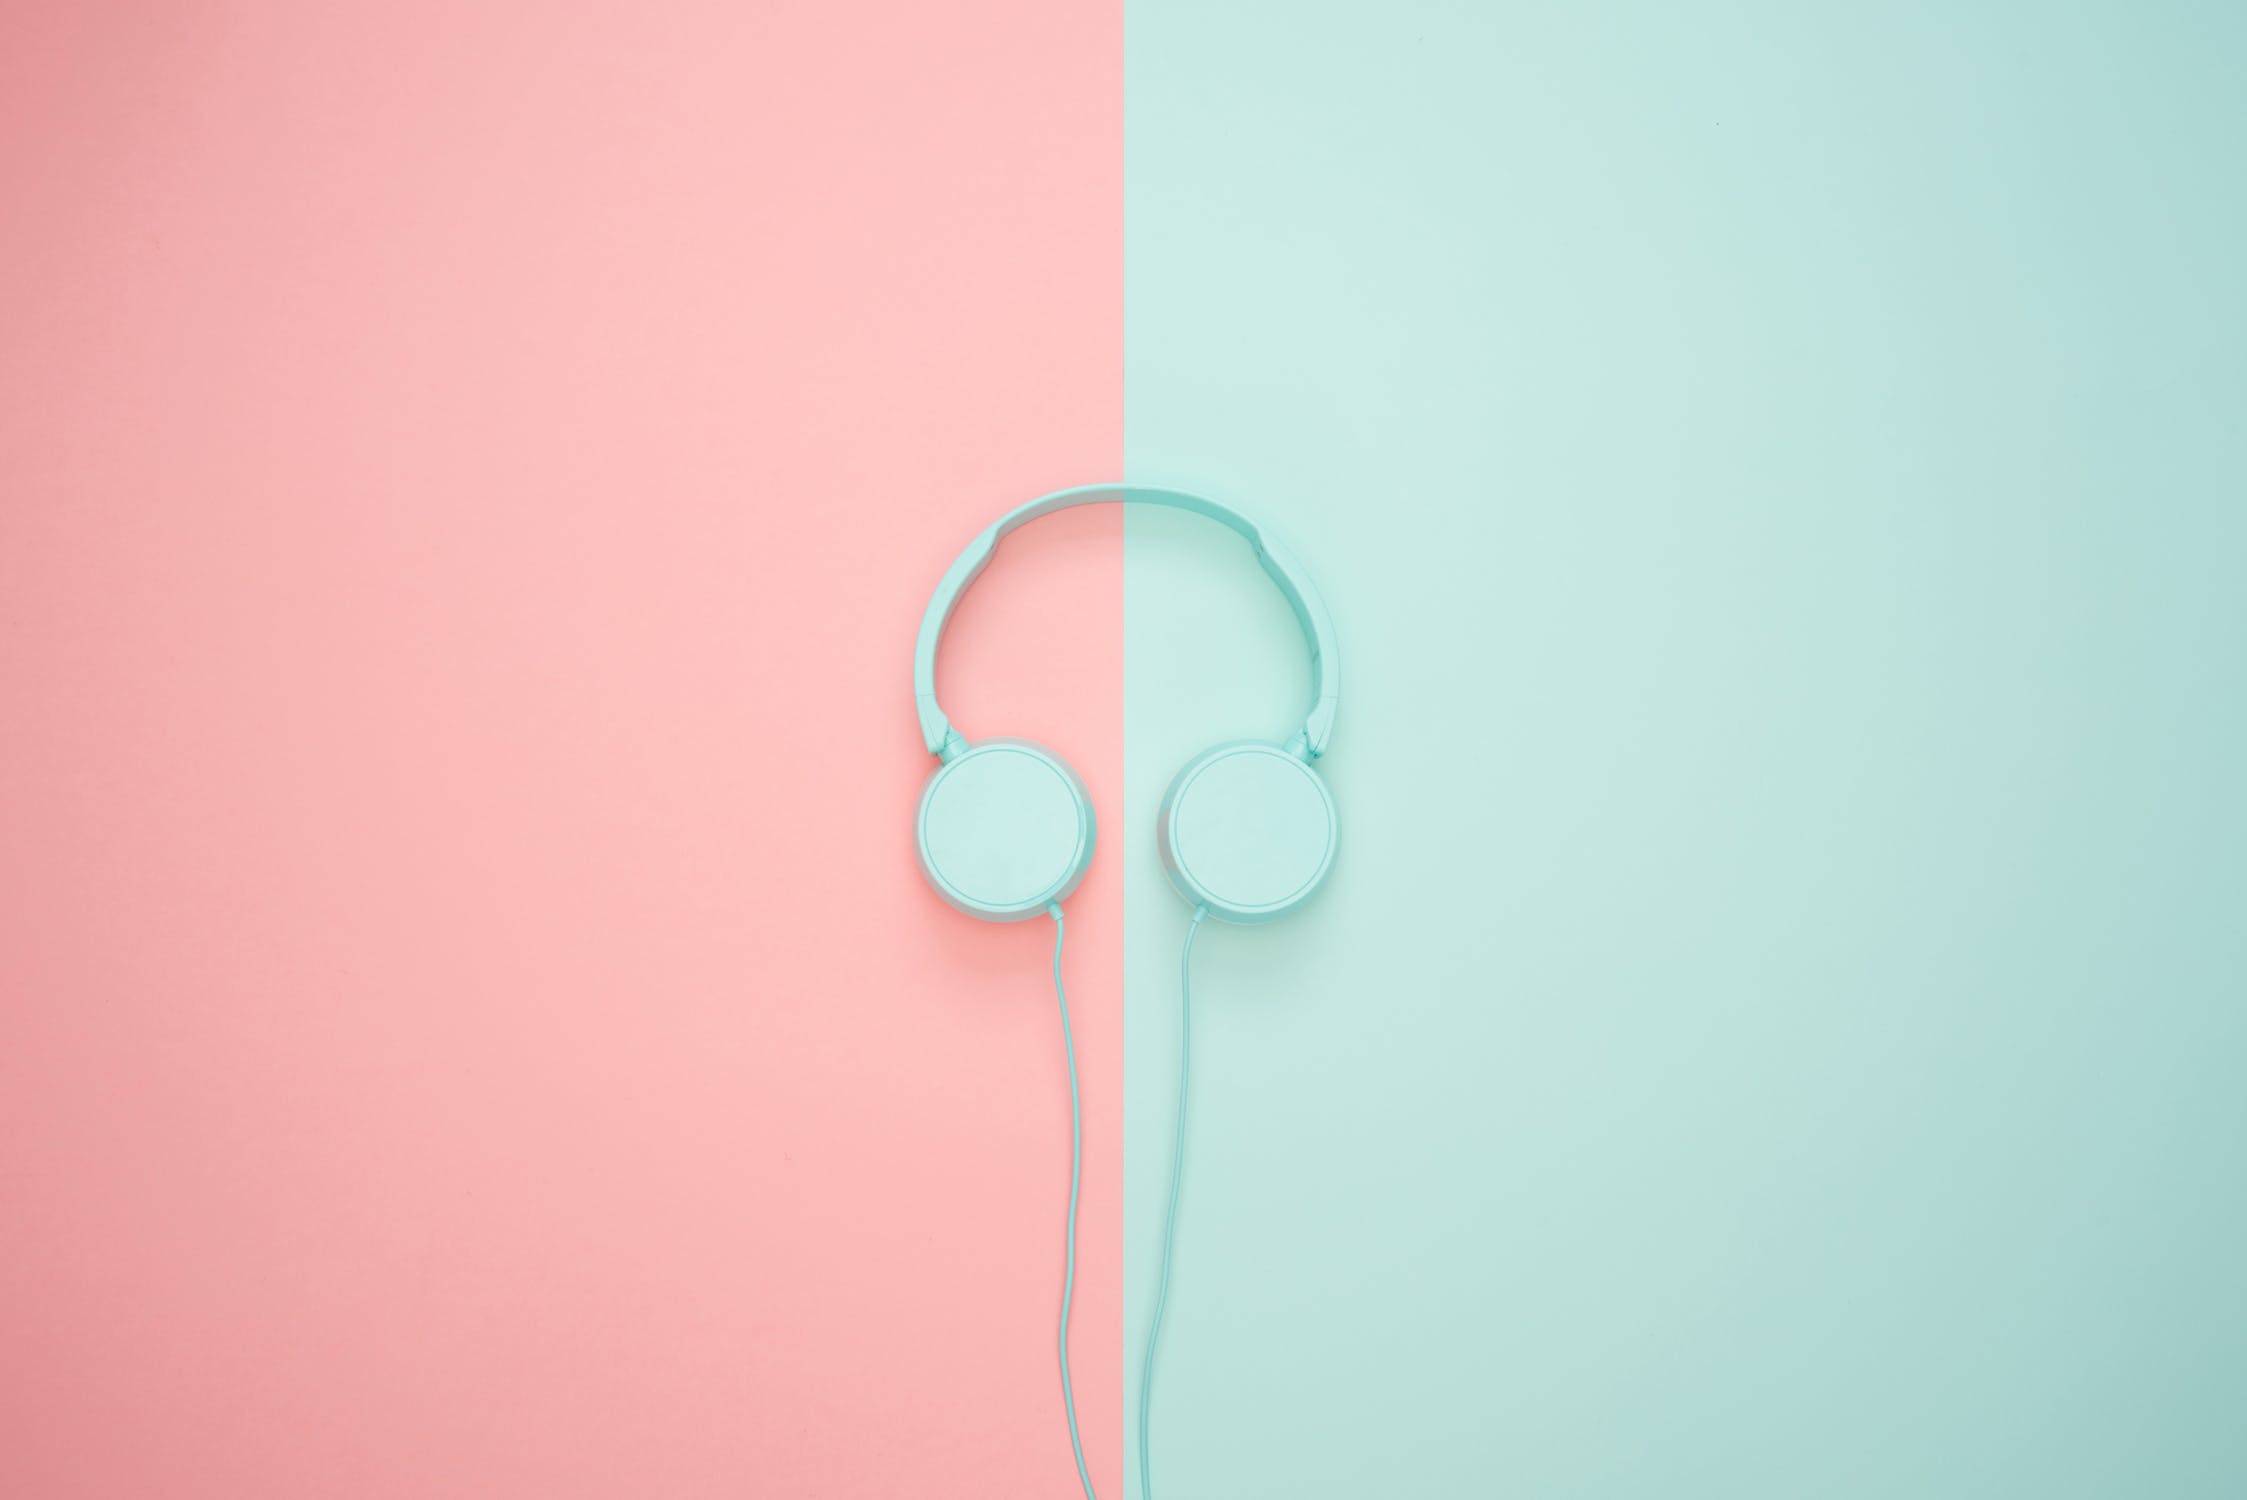 3 Podcasts The Support And Encourage Your Side Hustle